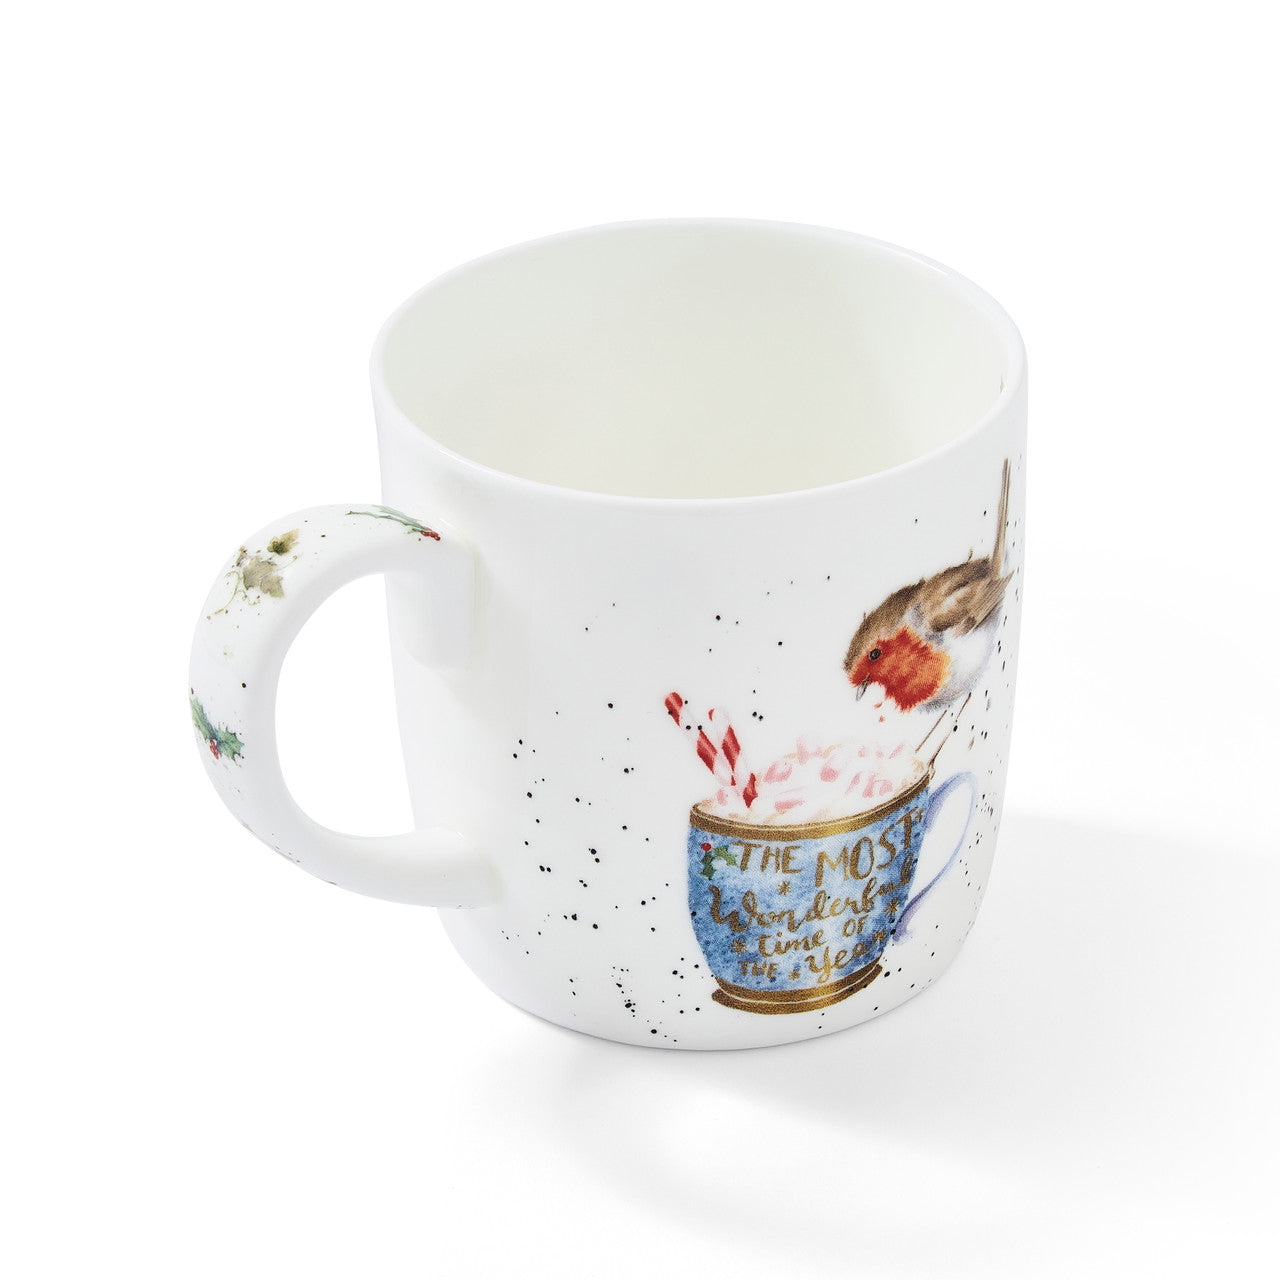 'Cup of Cheer' Robin Bone China Mug from Wrendale Designs and Portmeirion